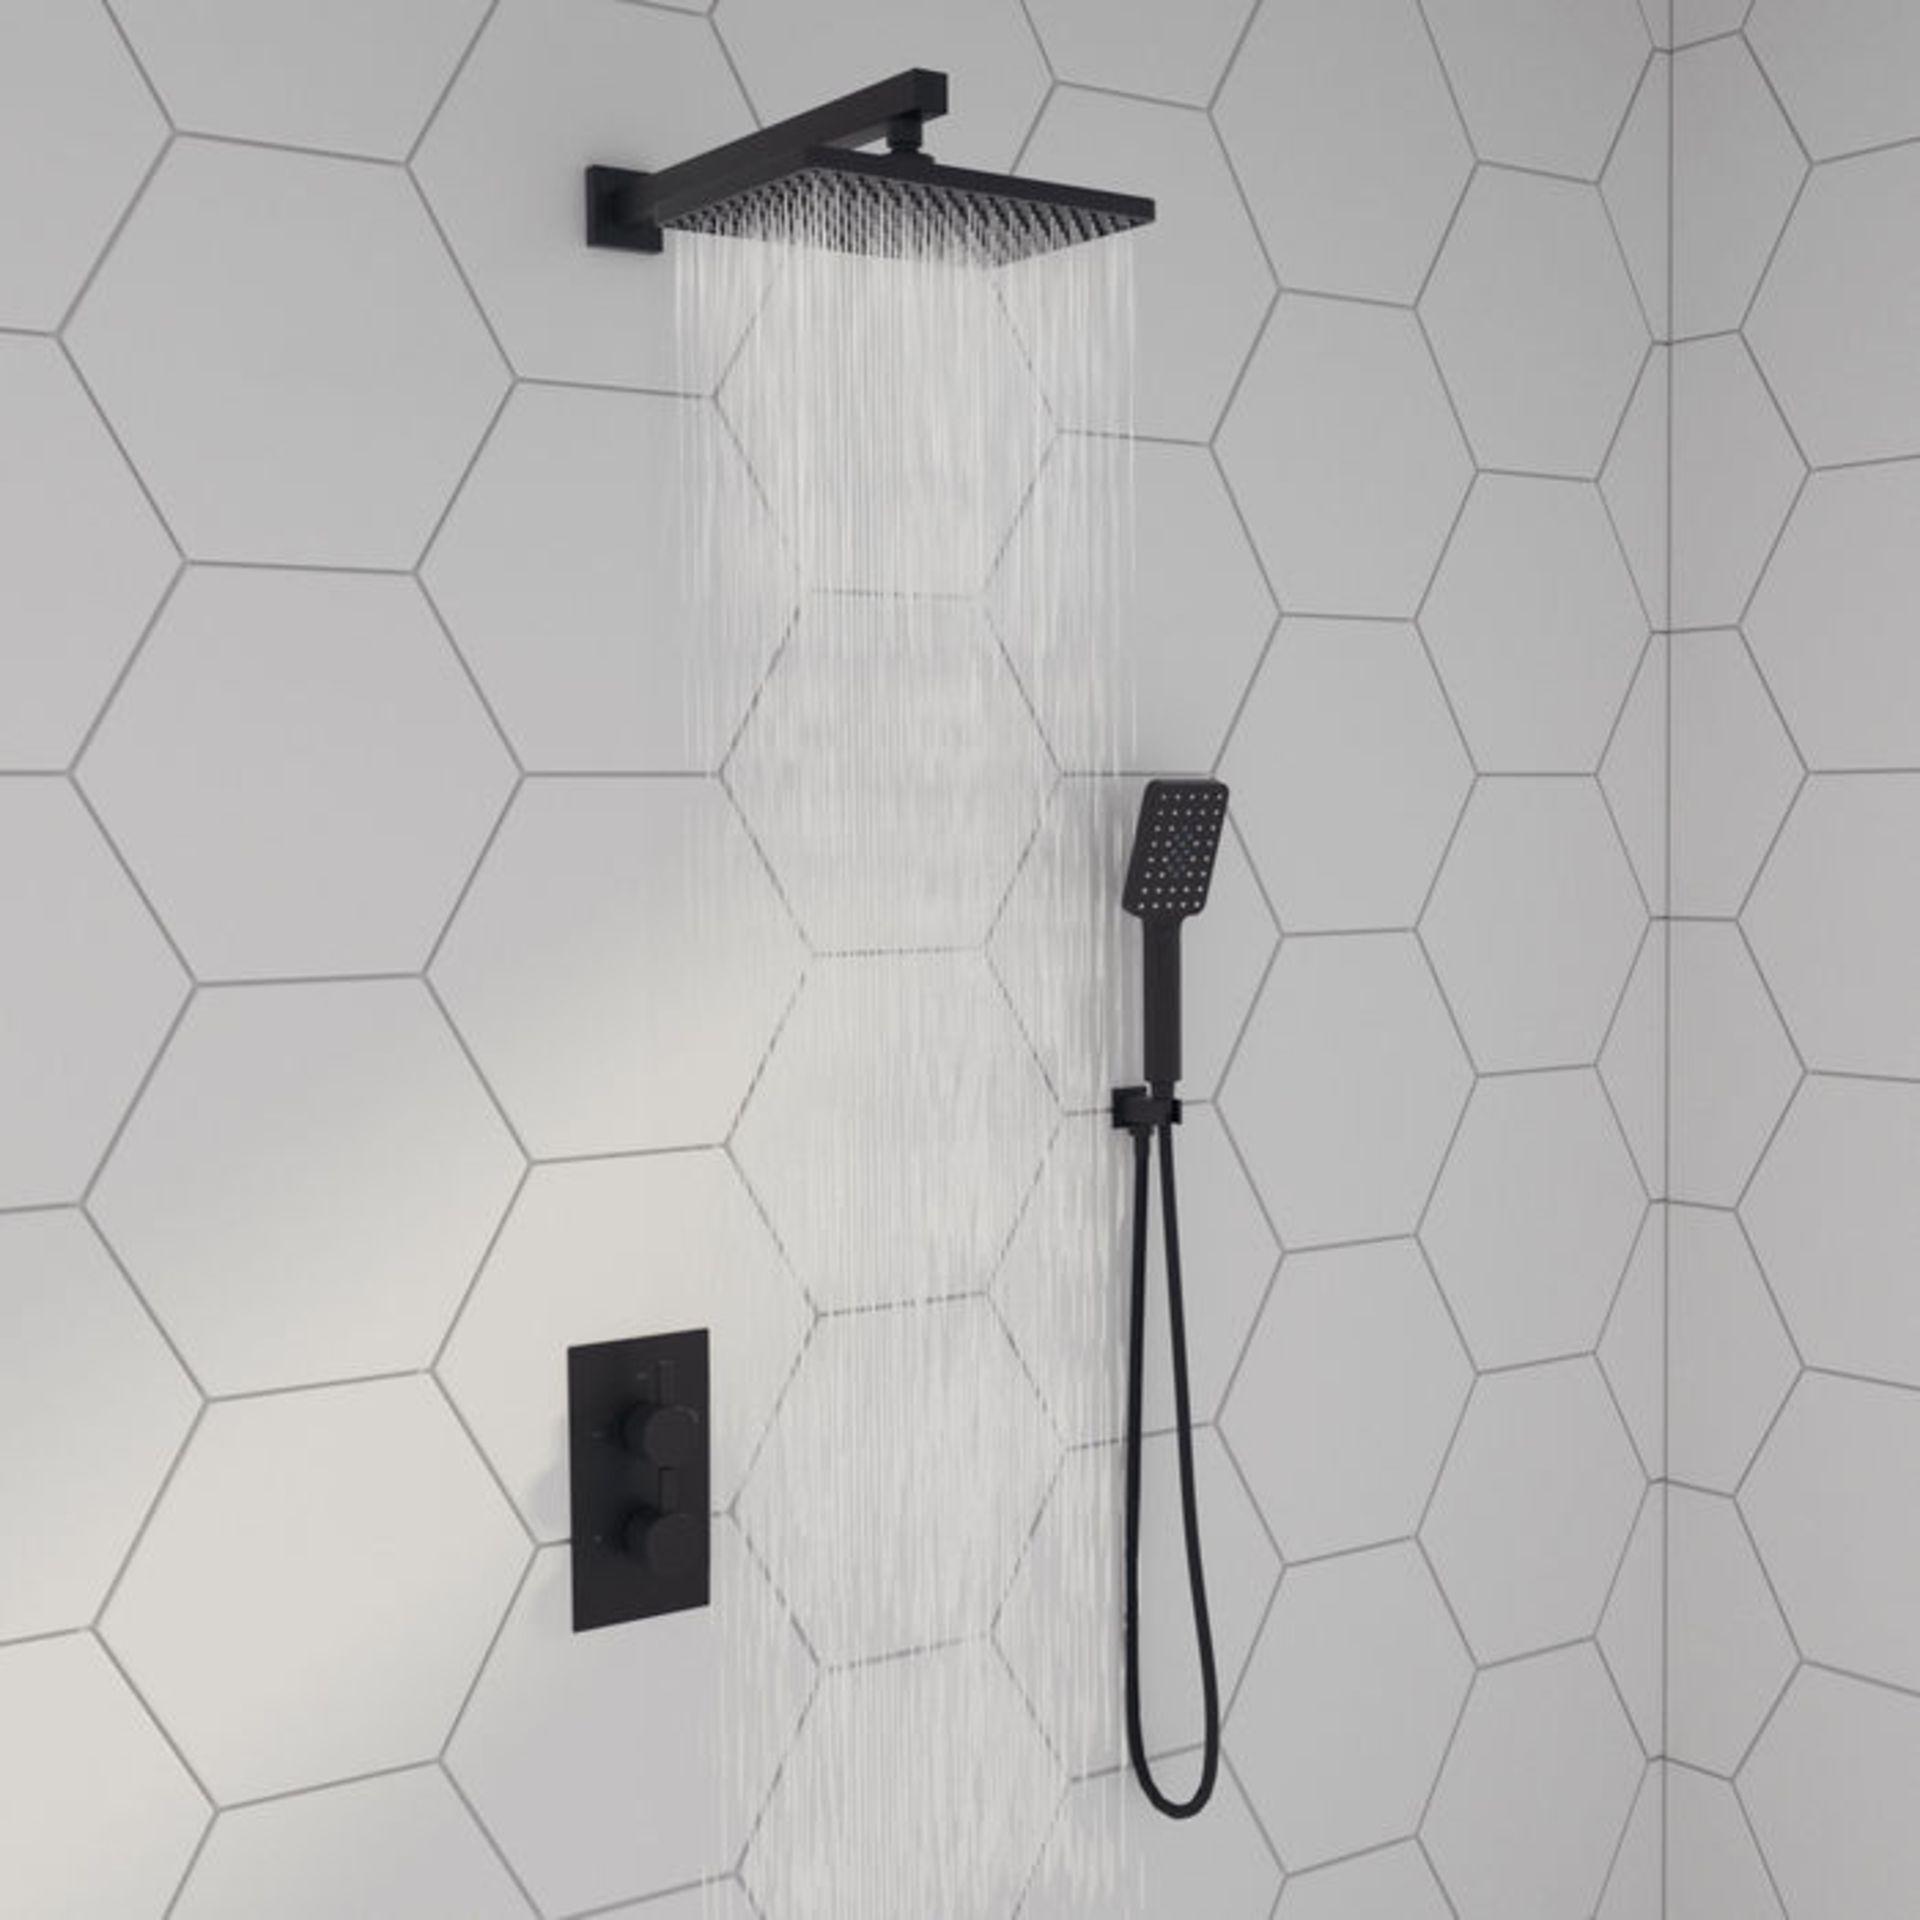 New & Boxed Square Concealed Thermostatic Mixer Shower Kit & Large Head, Matte Black. RRP £